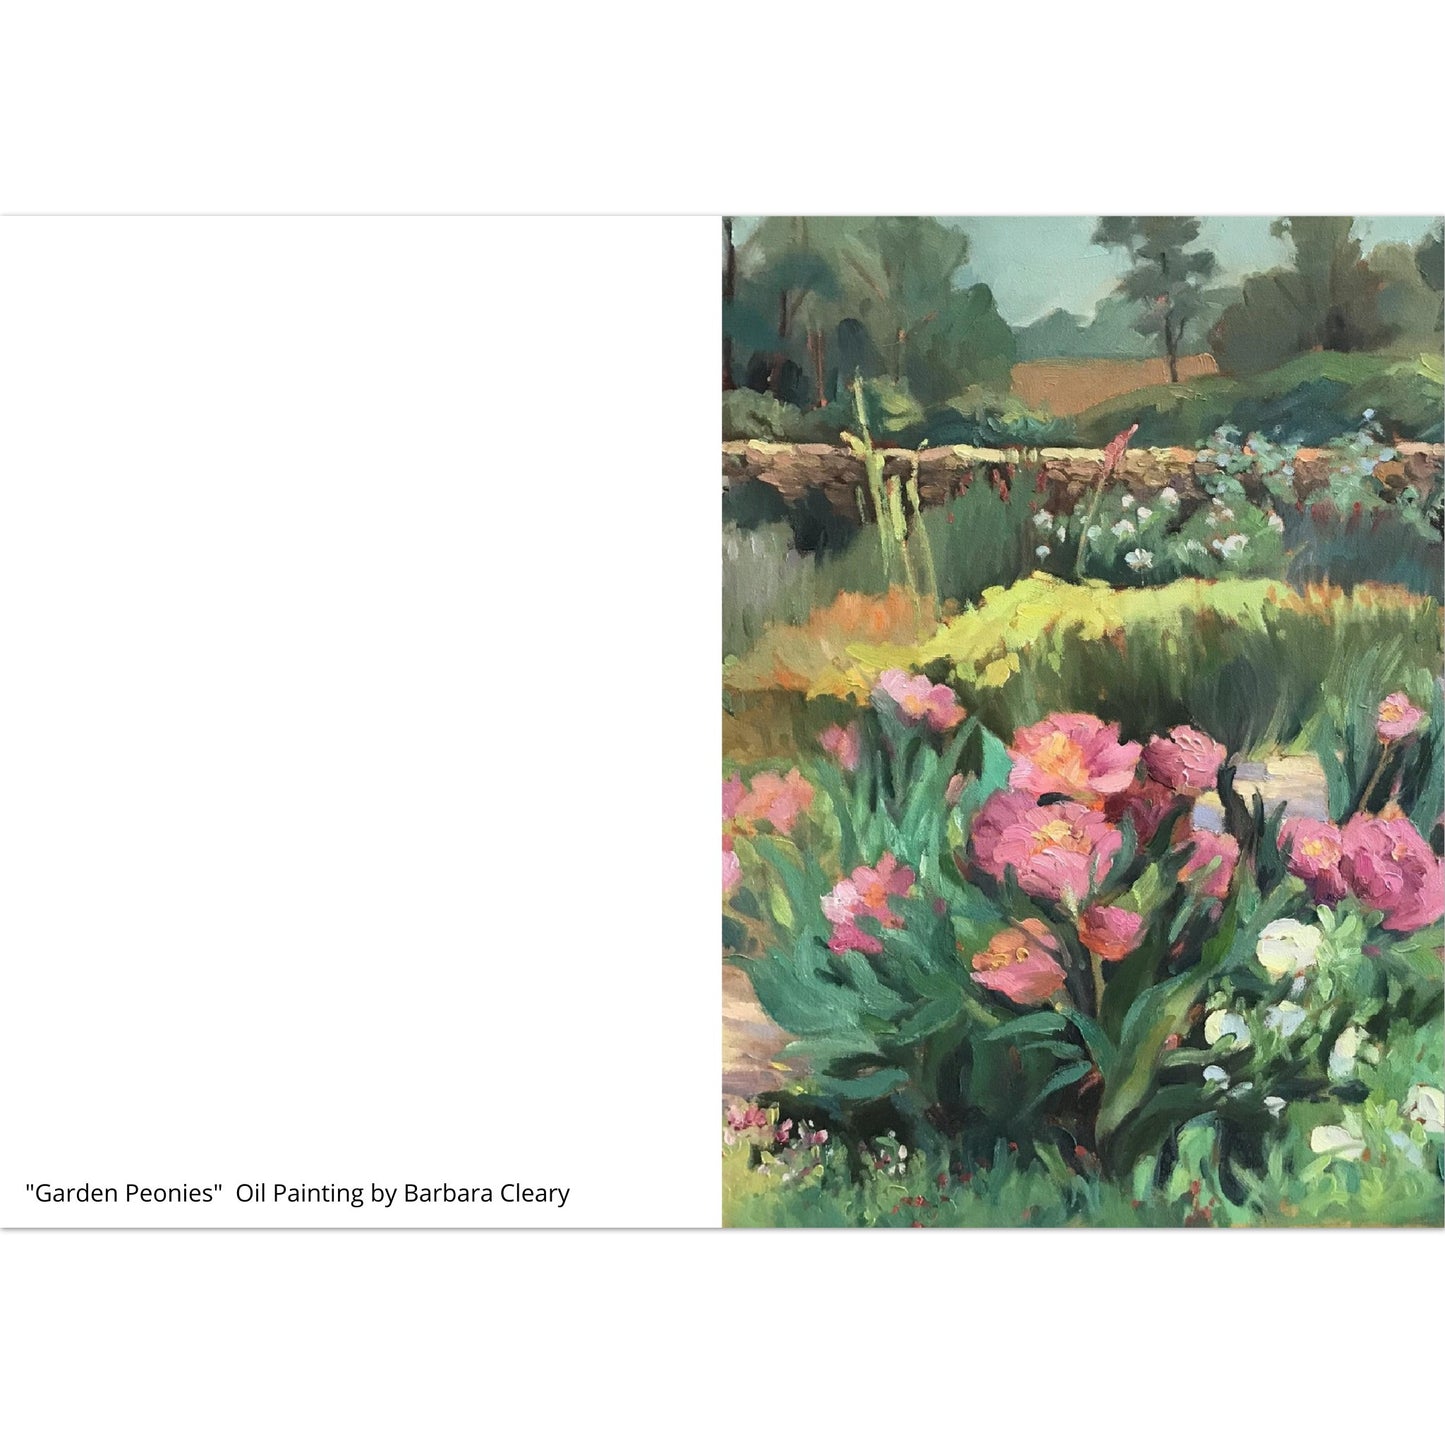 "Garden Peonies" Pack of 10 Greeting Cards (standard envelopes) (US & CA) by Barbara Cleary Designs